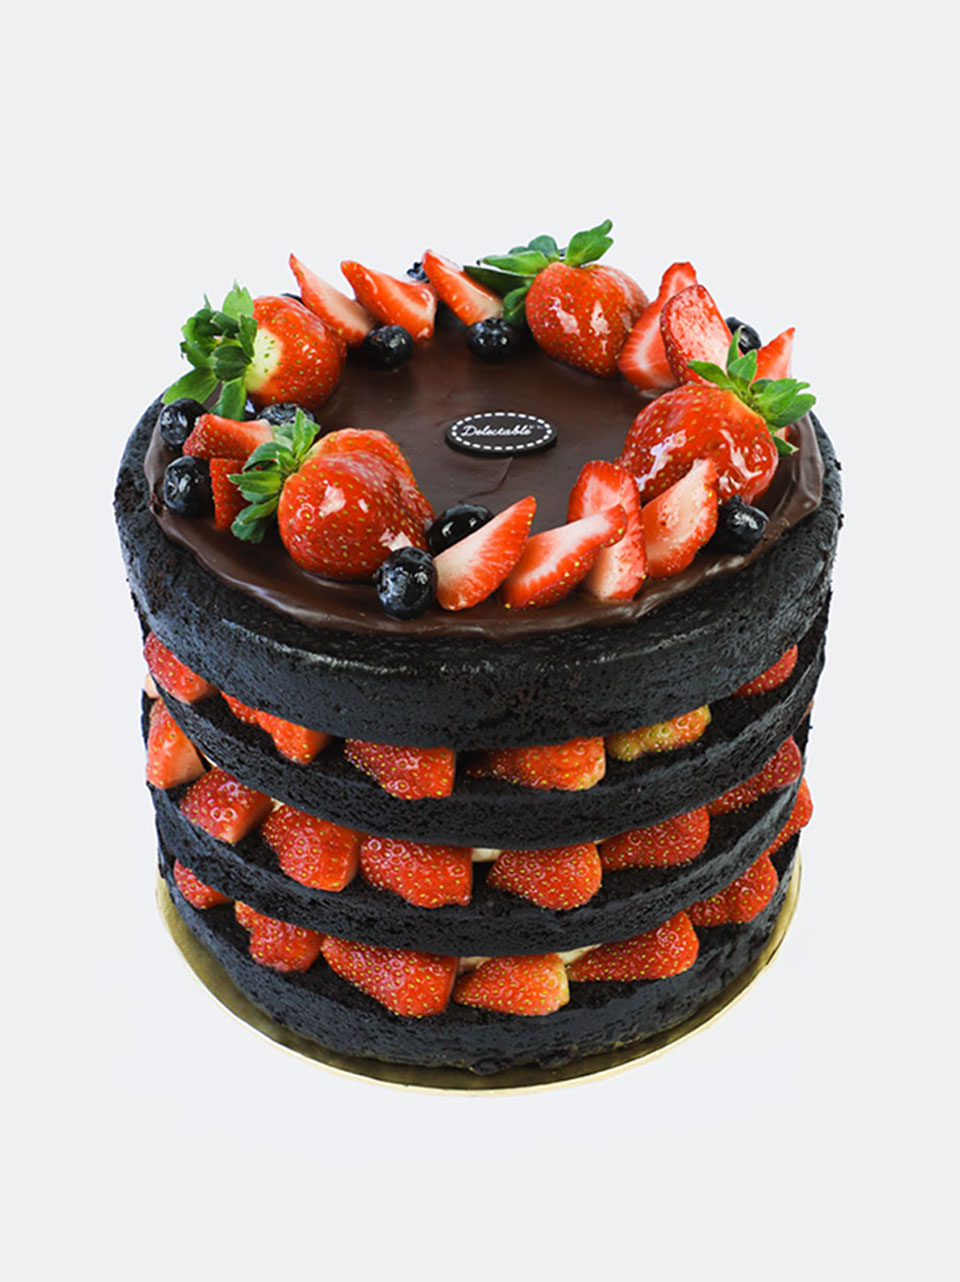 Delectable Cake - Cake delivery Malaysia